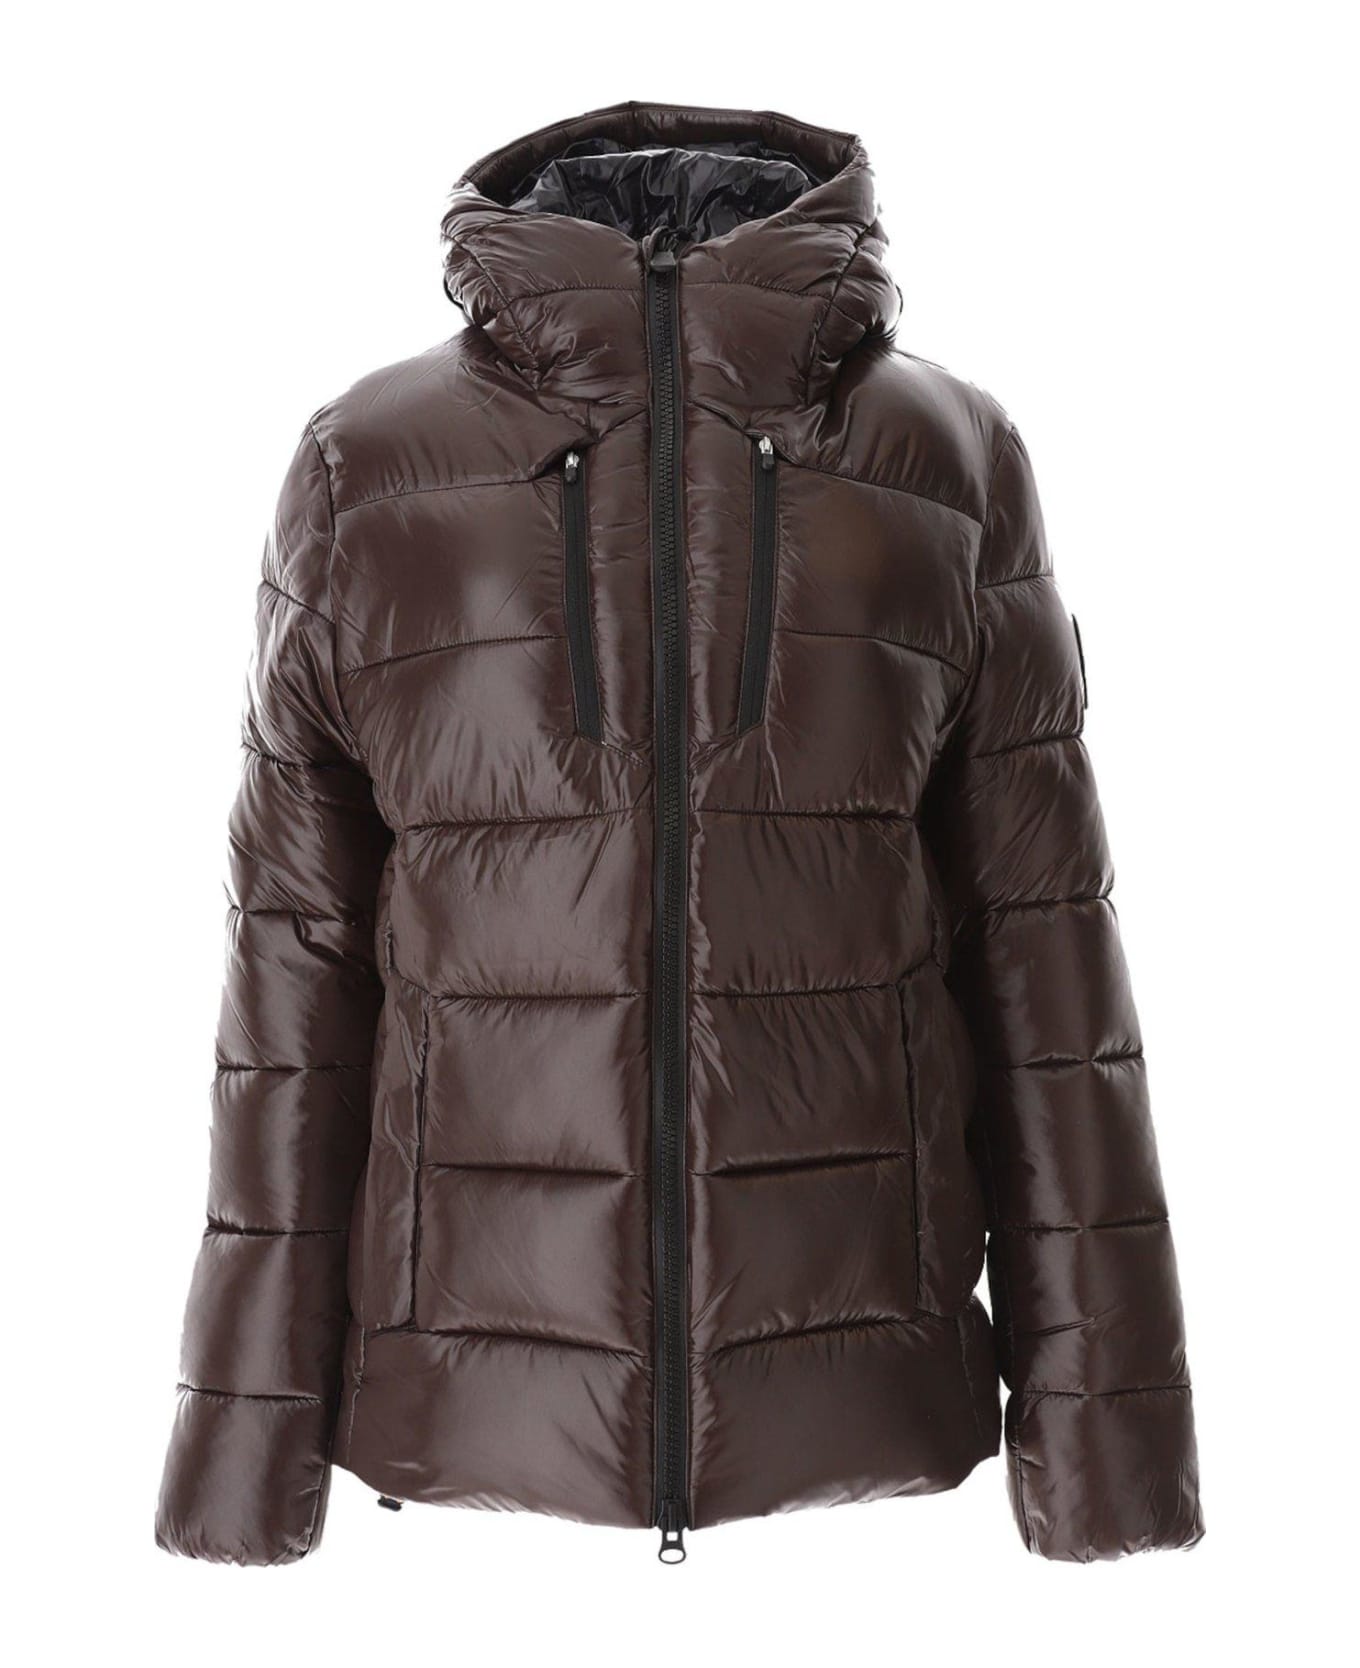 Save the Duck Hooded Puffer Jacket - Brown/black